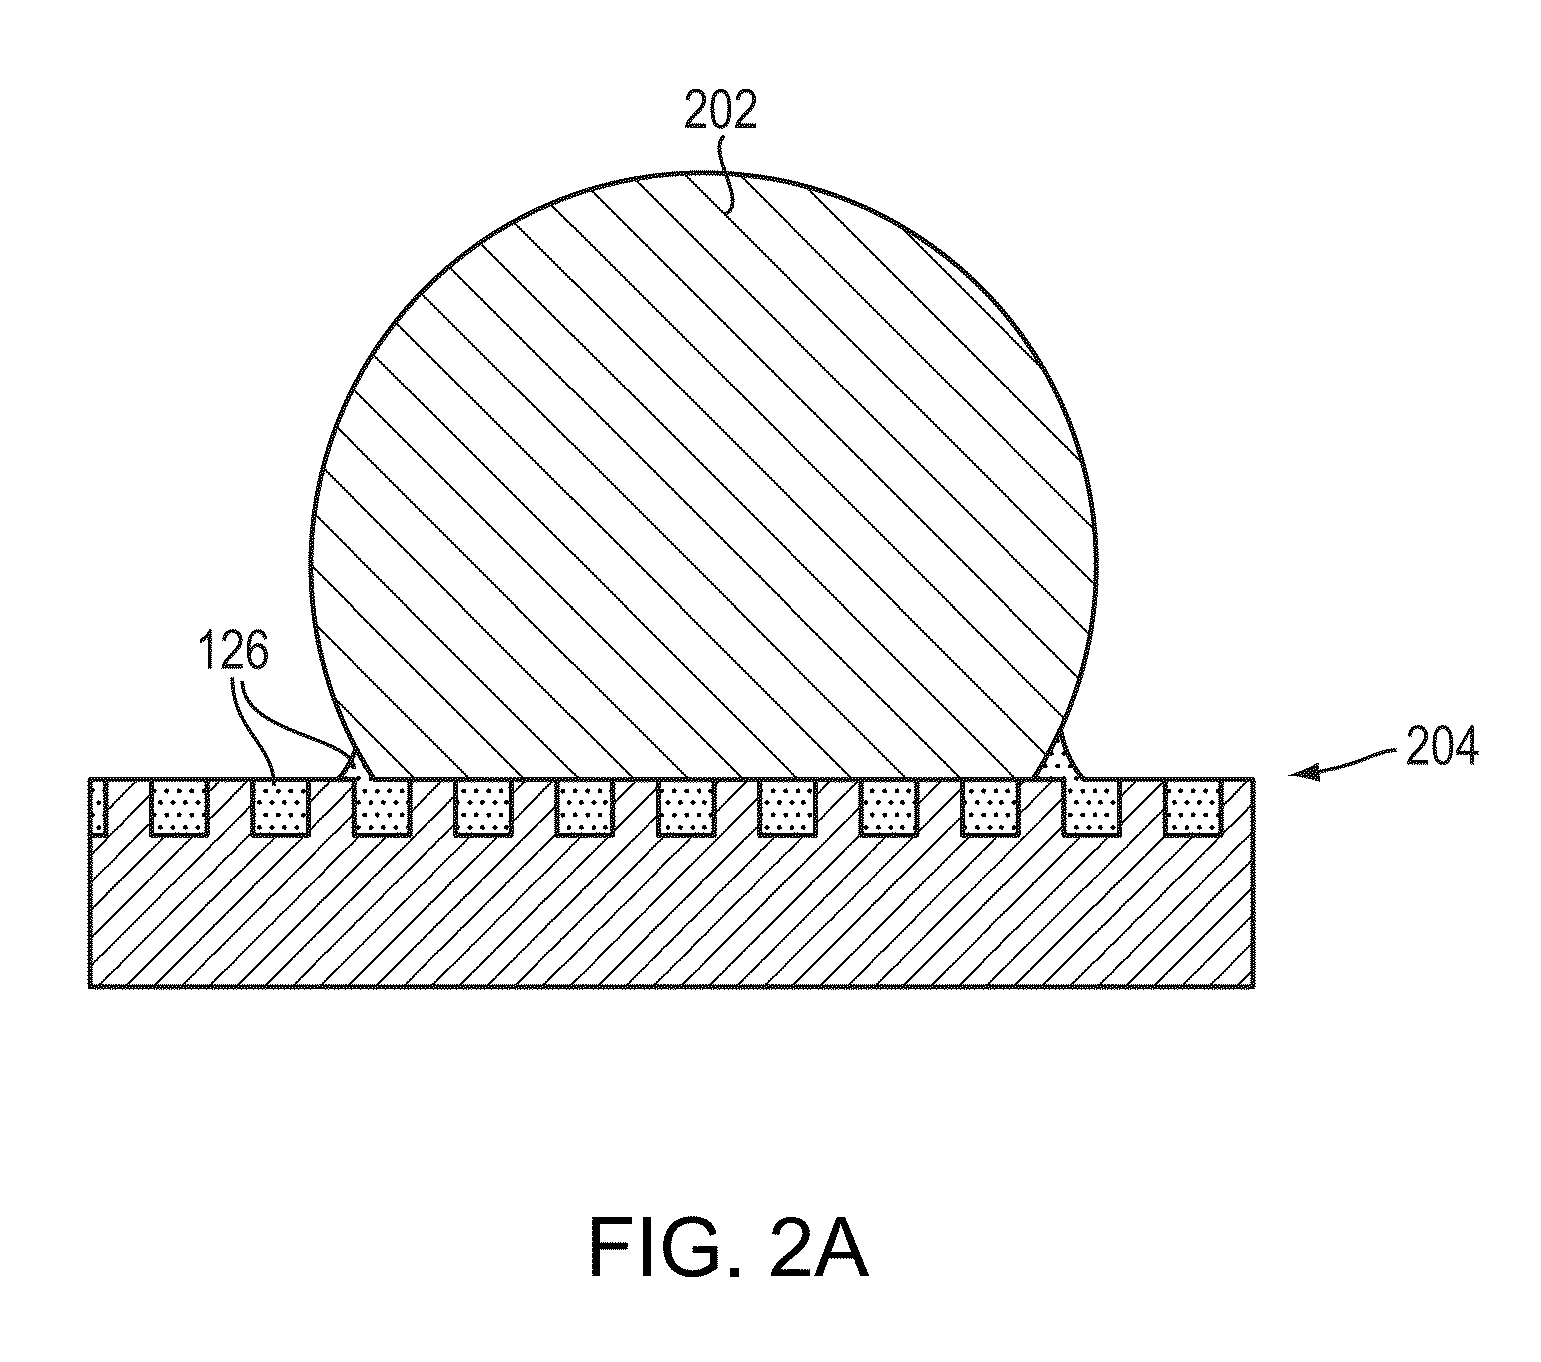 Liquid-Impregnated Surfaces, Methods of Making, and Devices Incorporating the Same